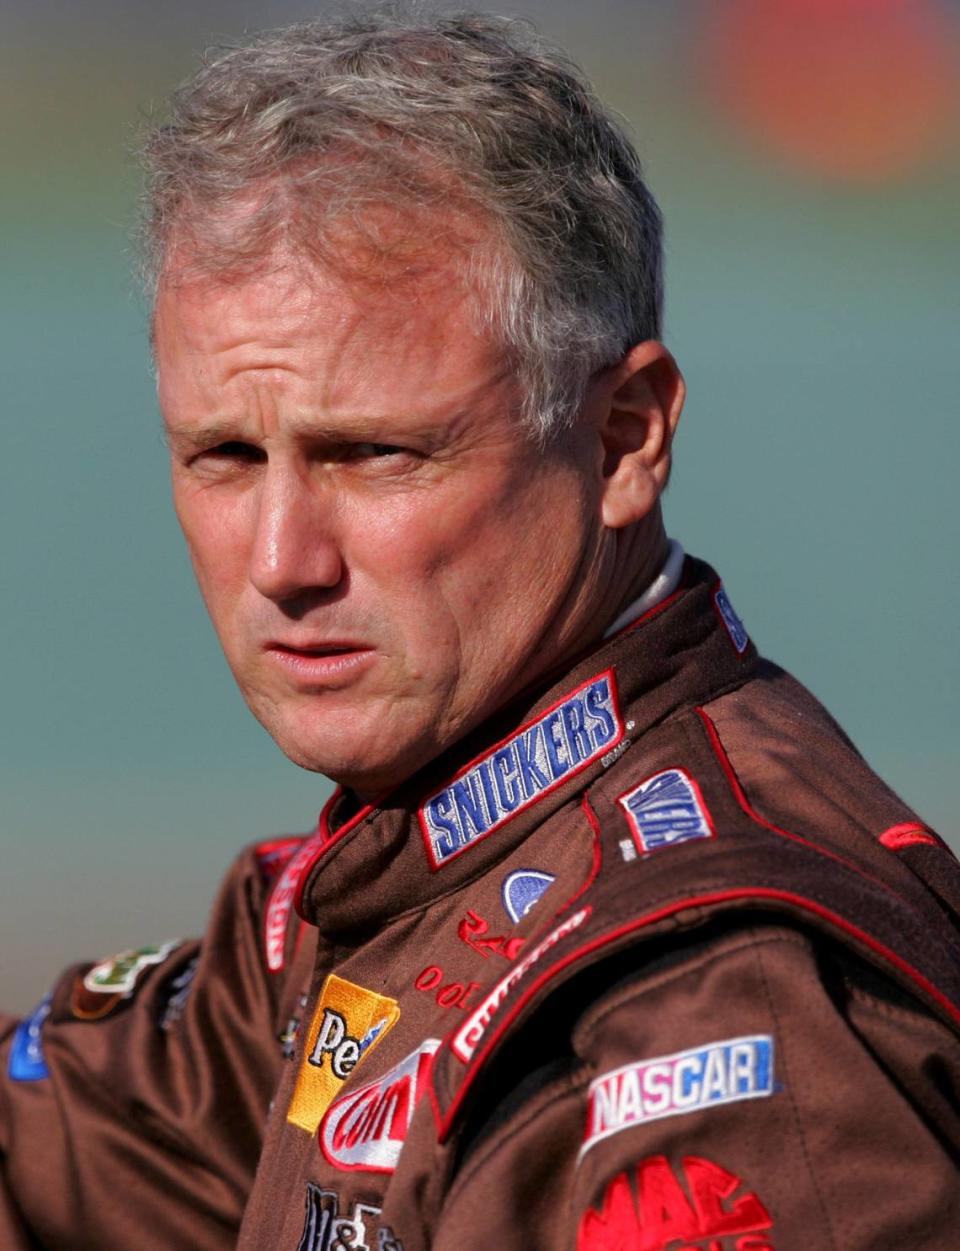 NASCAR driver Ricky Rudd at the 2007 Ford 400 at Homestead Miami Speedway.